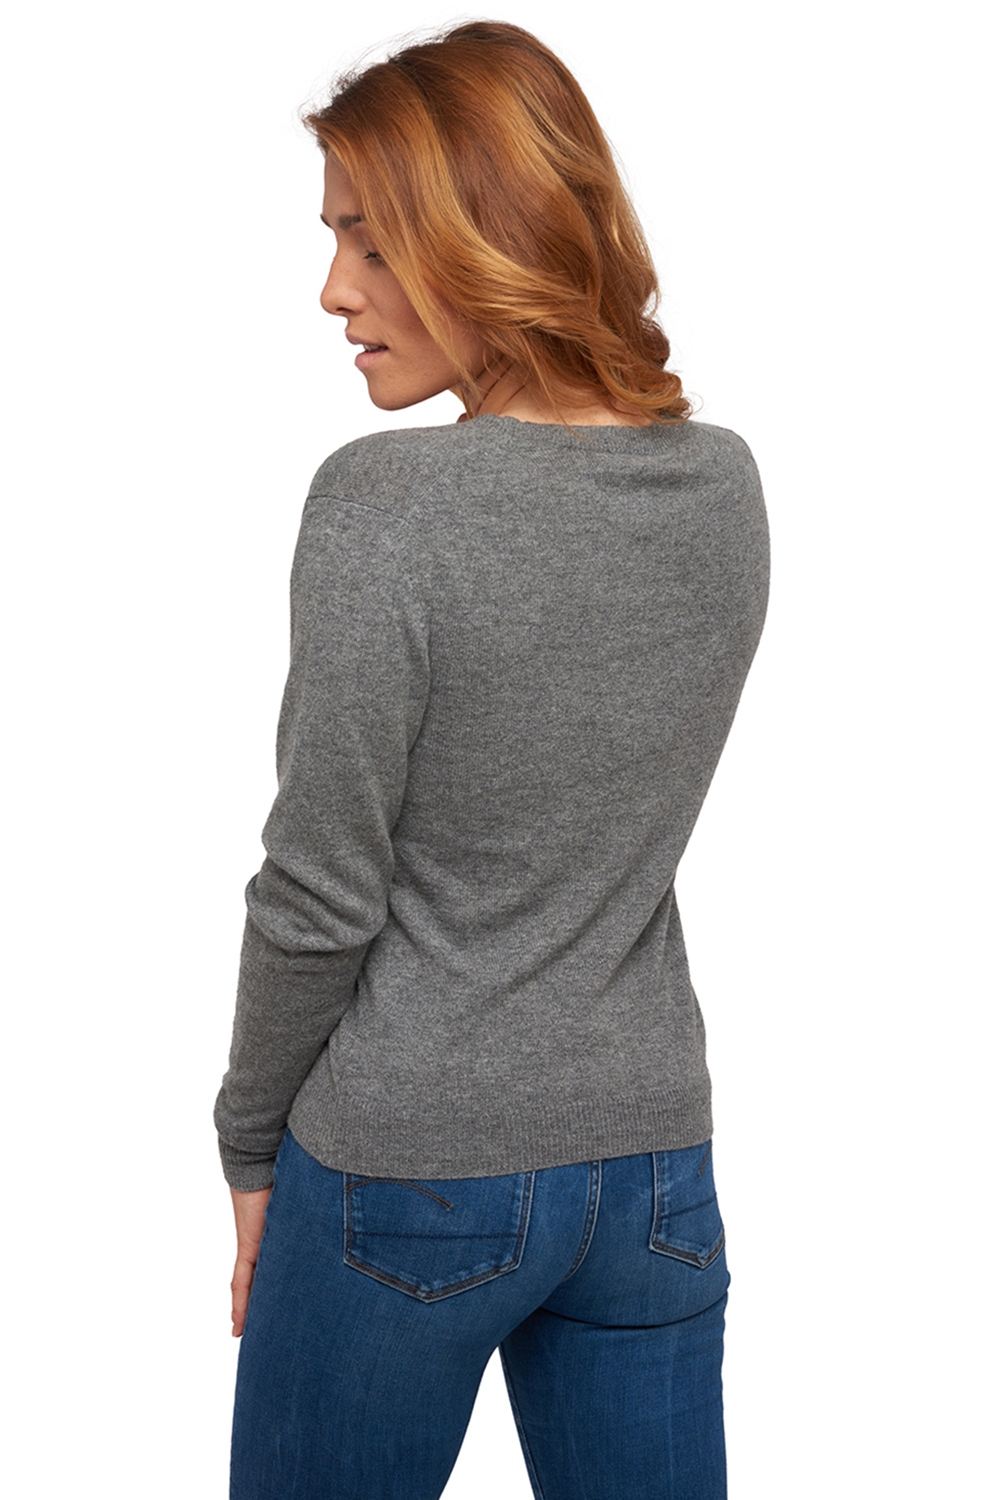 Cashmere ladies basic sweaters at low prices taline first grey marl m